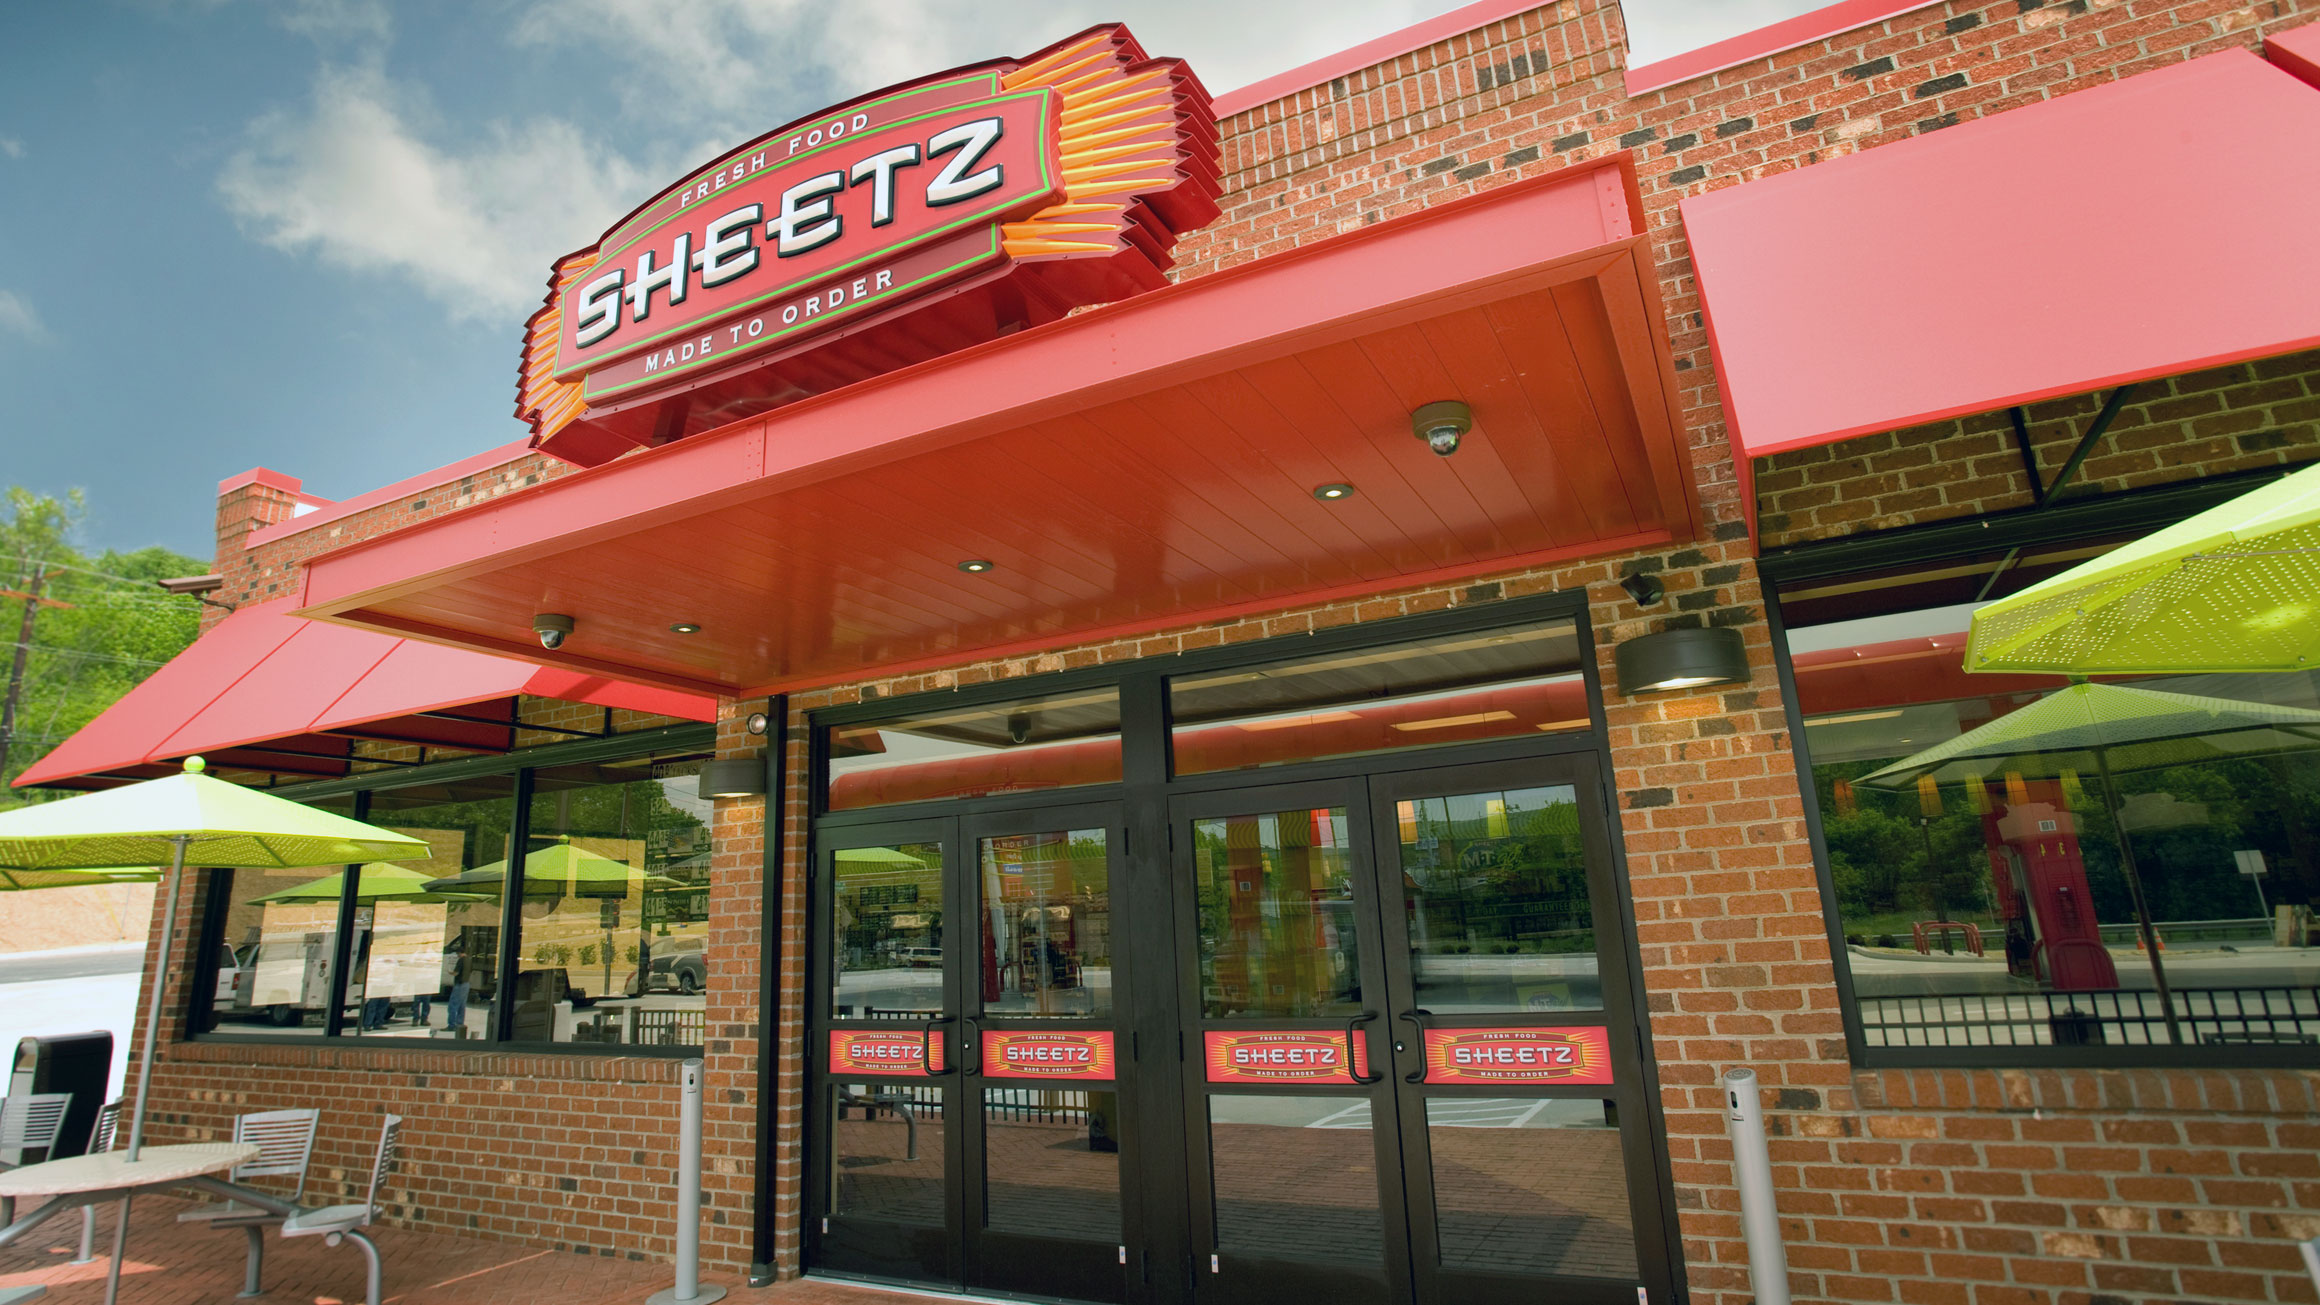 The photo shows the entrance of a Sheetz convenience store